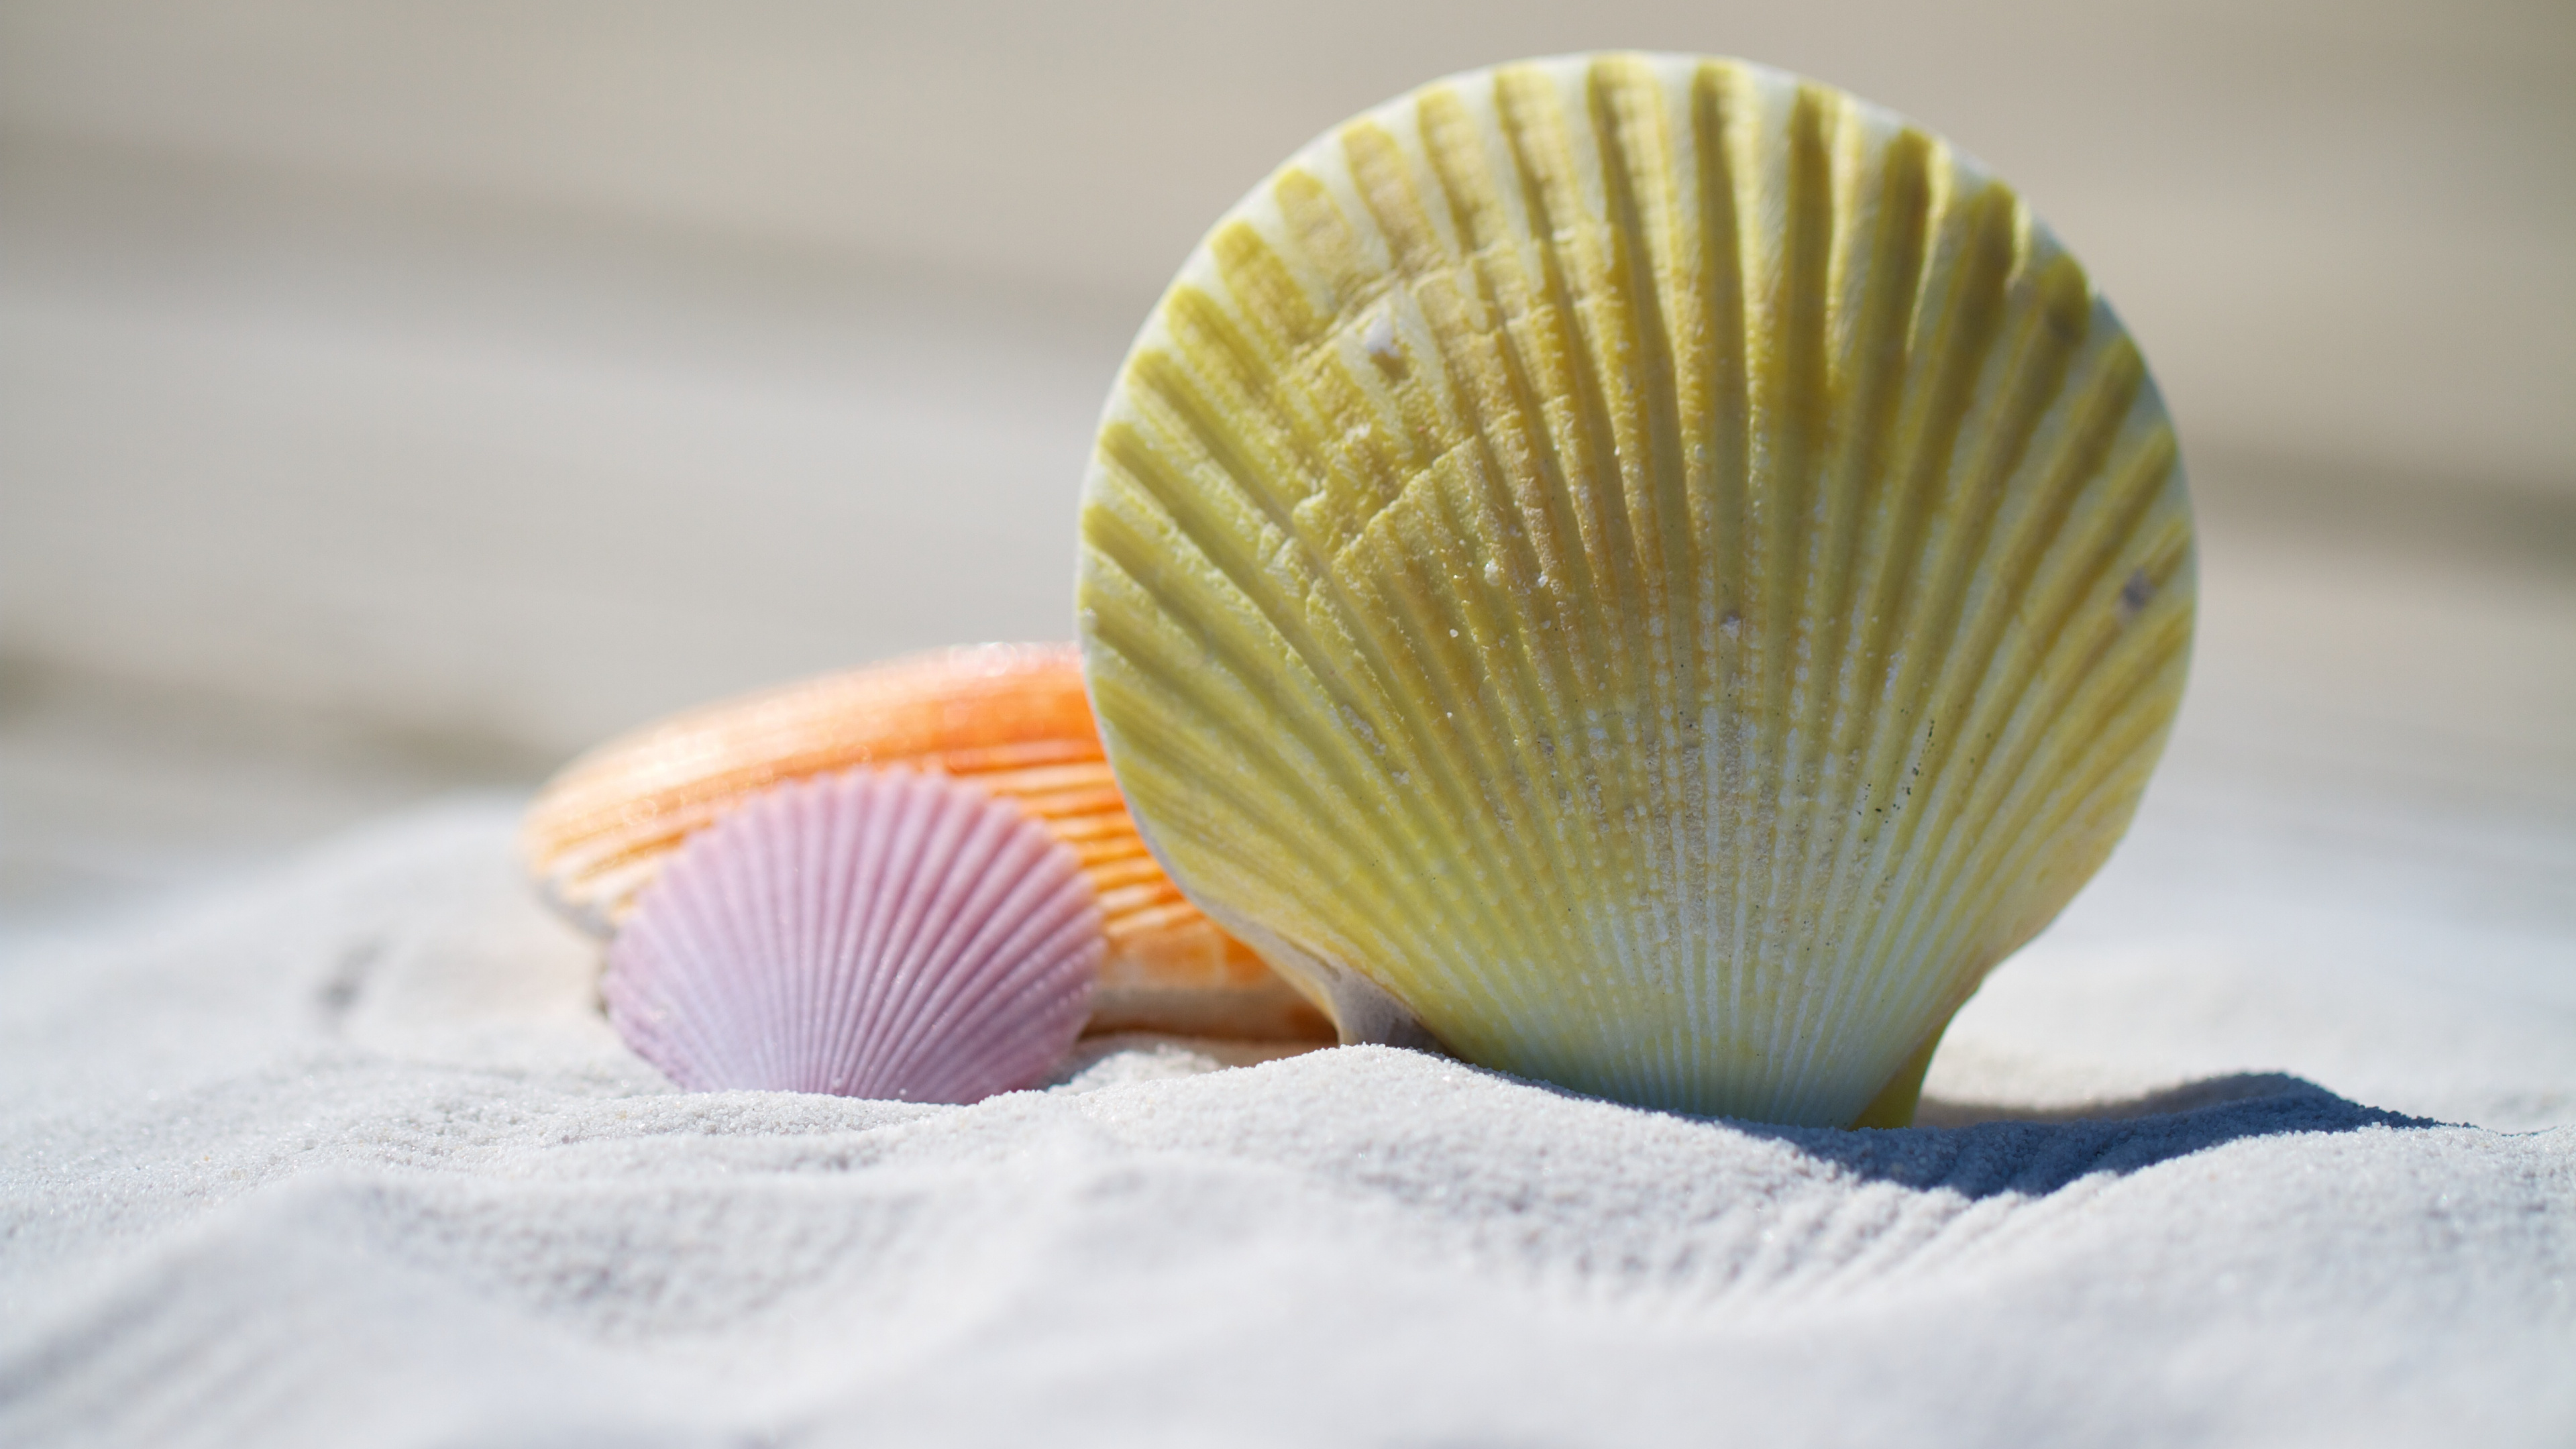 Sea Shell: Sand, Supports and protects the soft parts of an animal in the phylum Mollusca. 3840x2160 4K Background.